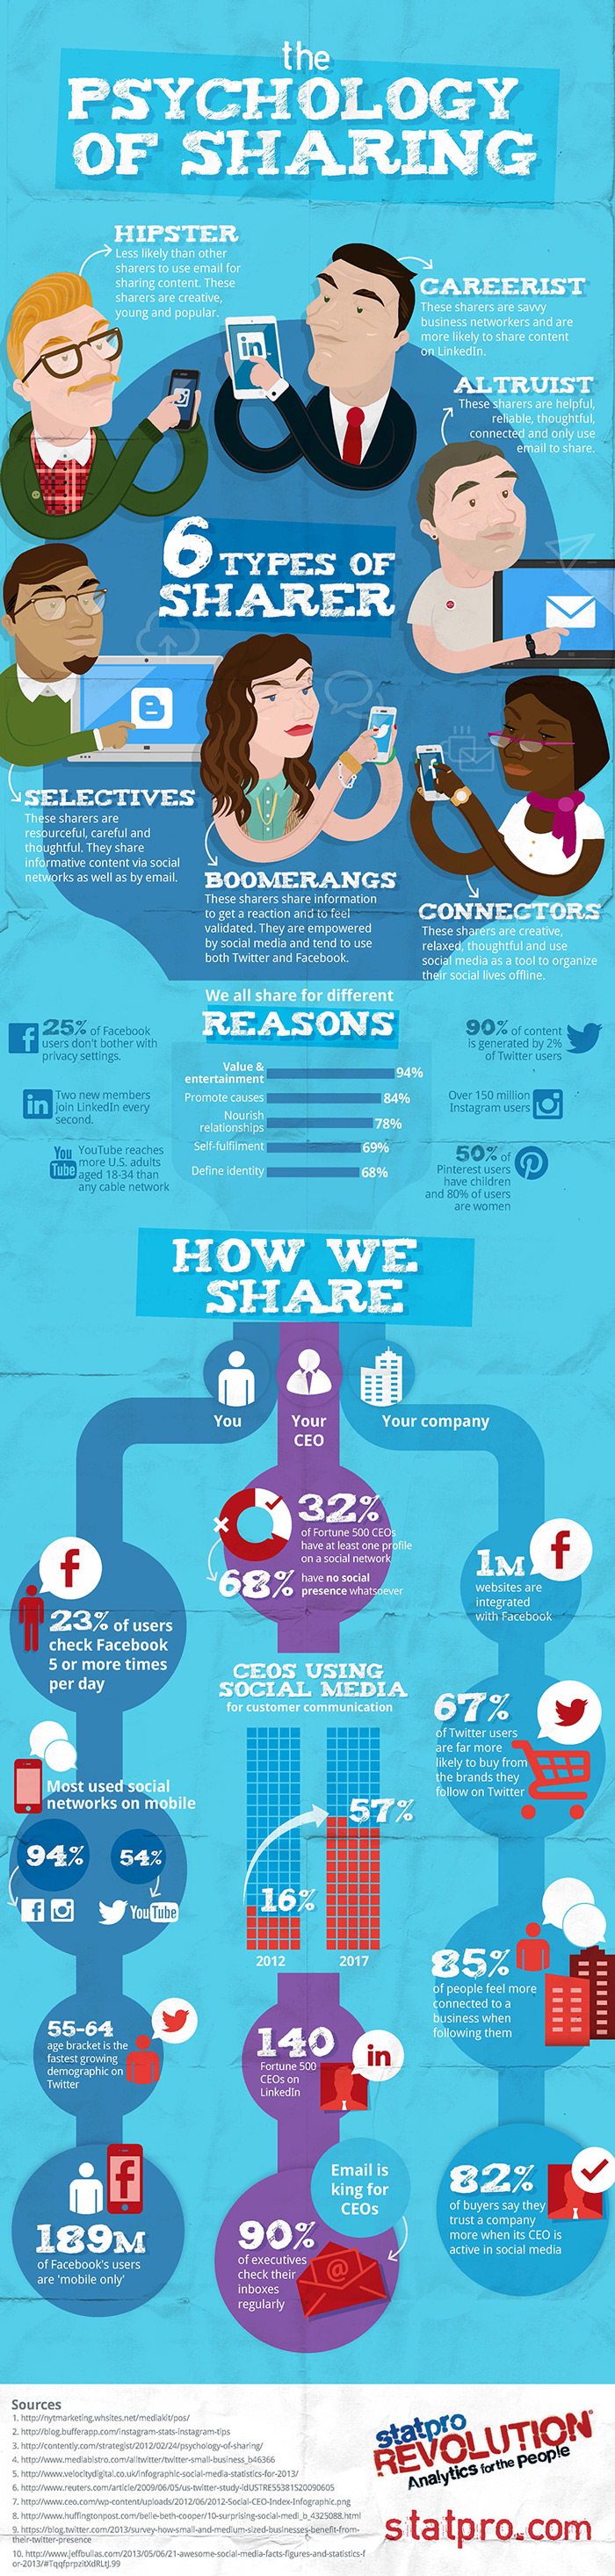 psychology-of-sharing-infographic